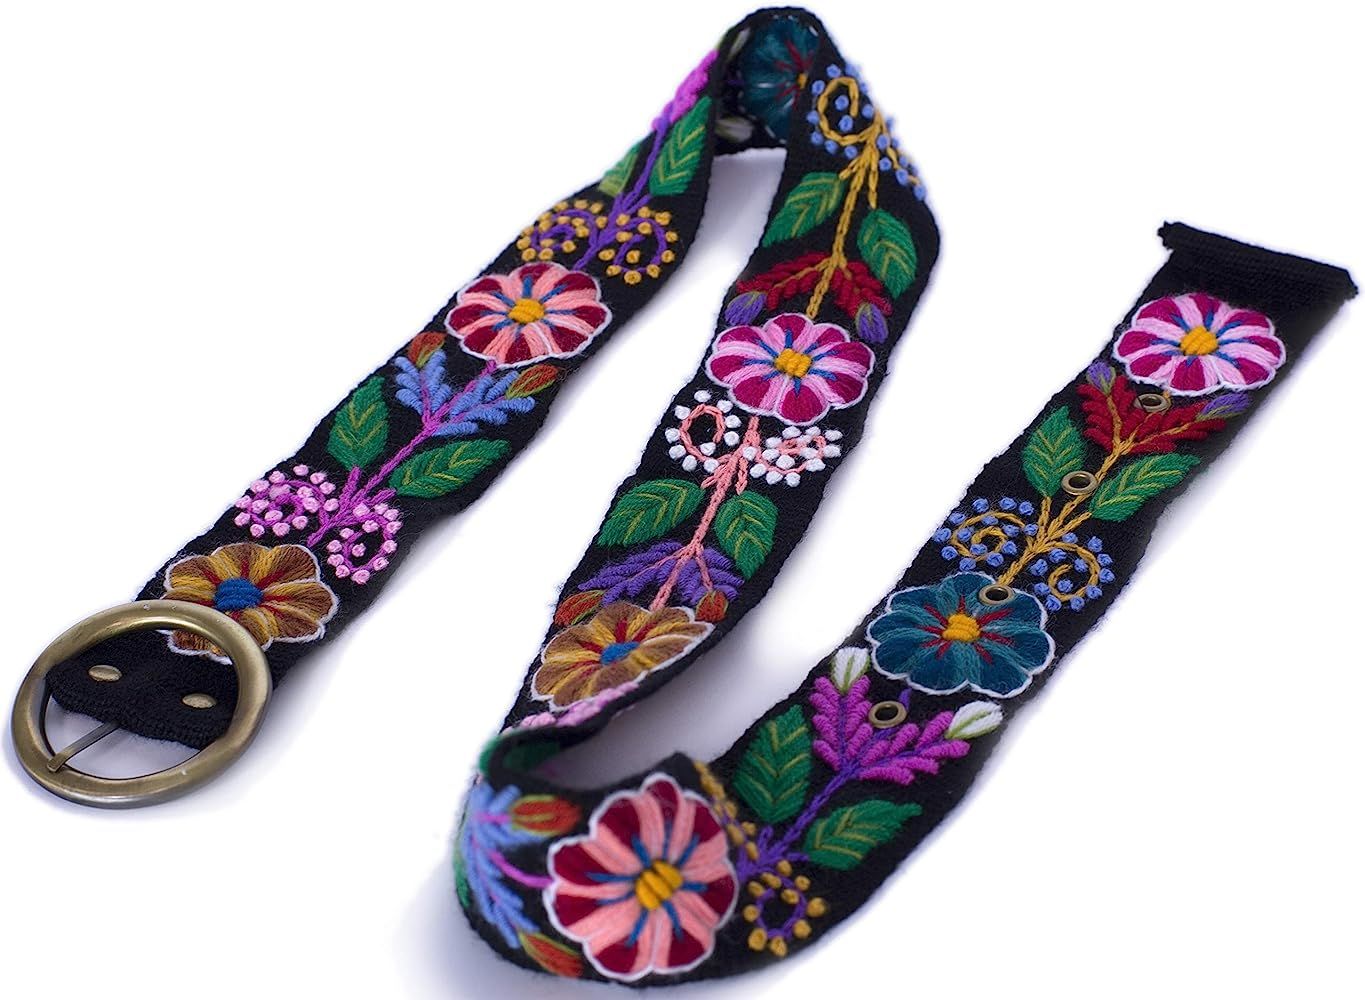 Raymis Womens 100% Alpaca Wool Handmade Fair Trade Belt with Colorful Embroidered Flowers | Amazon (US)